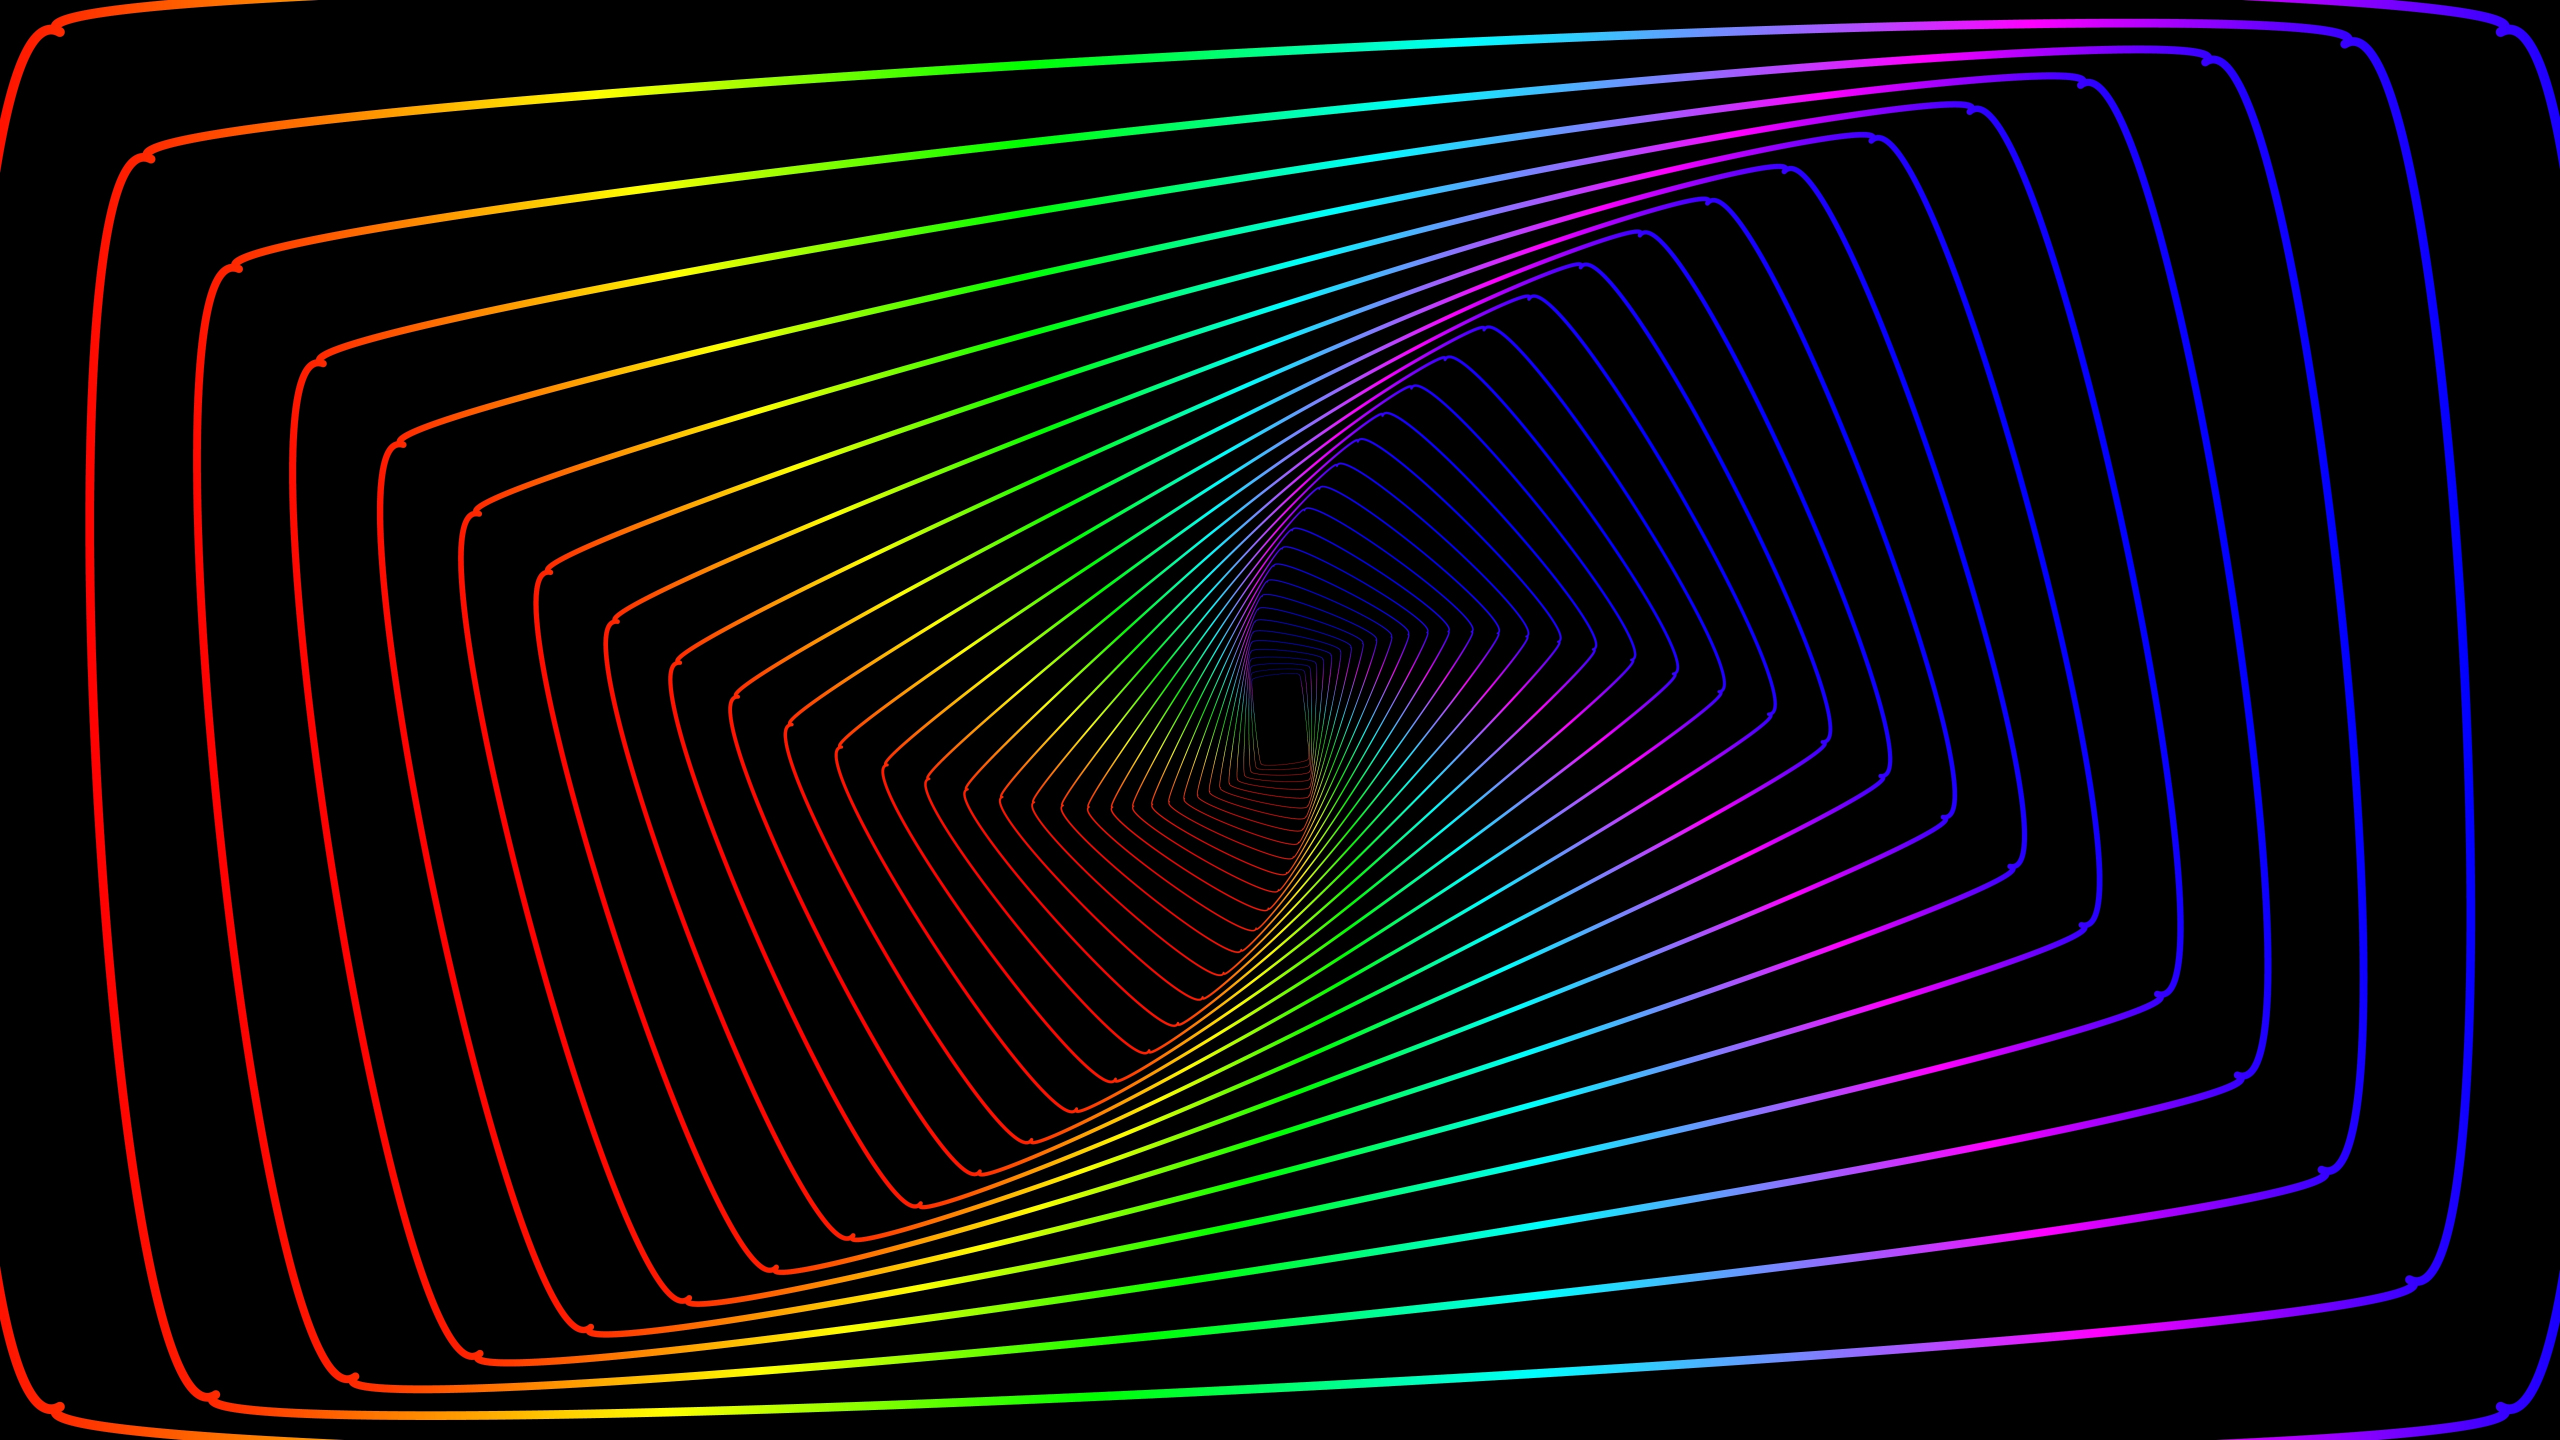 Colorful lines, swirl, abstract, minimal, 2560x1440 wallpaper